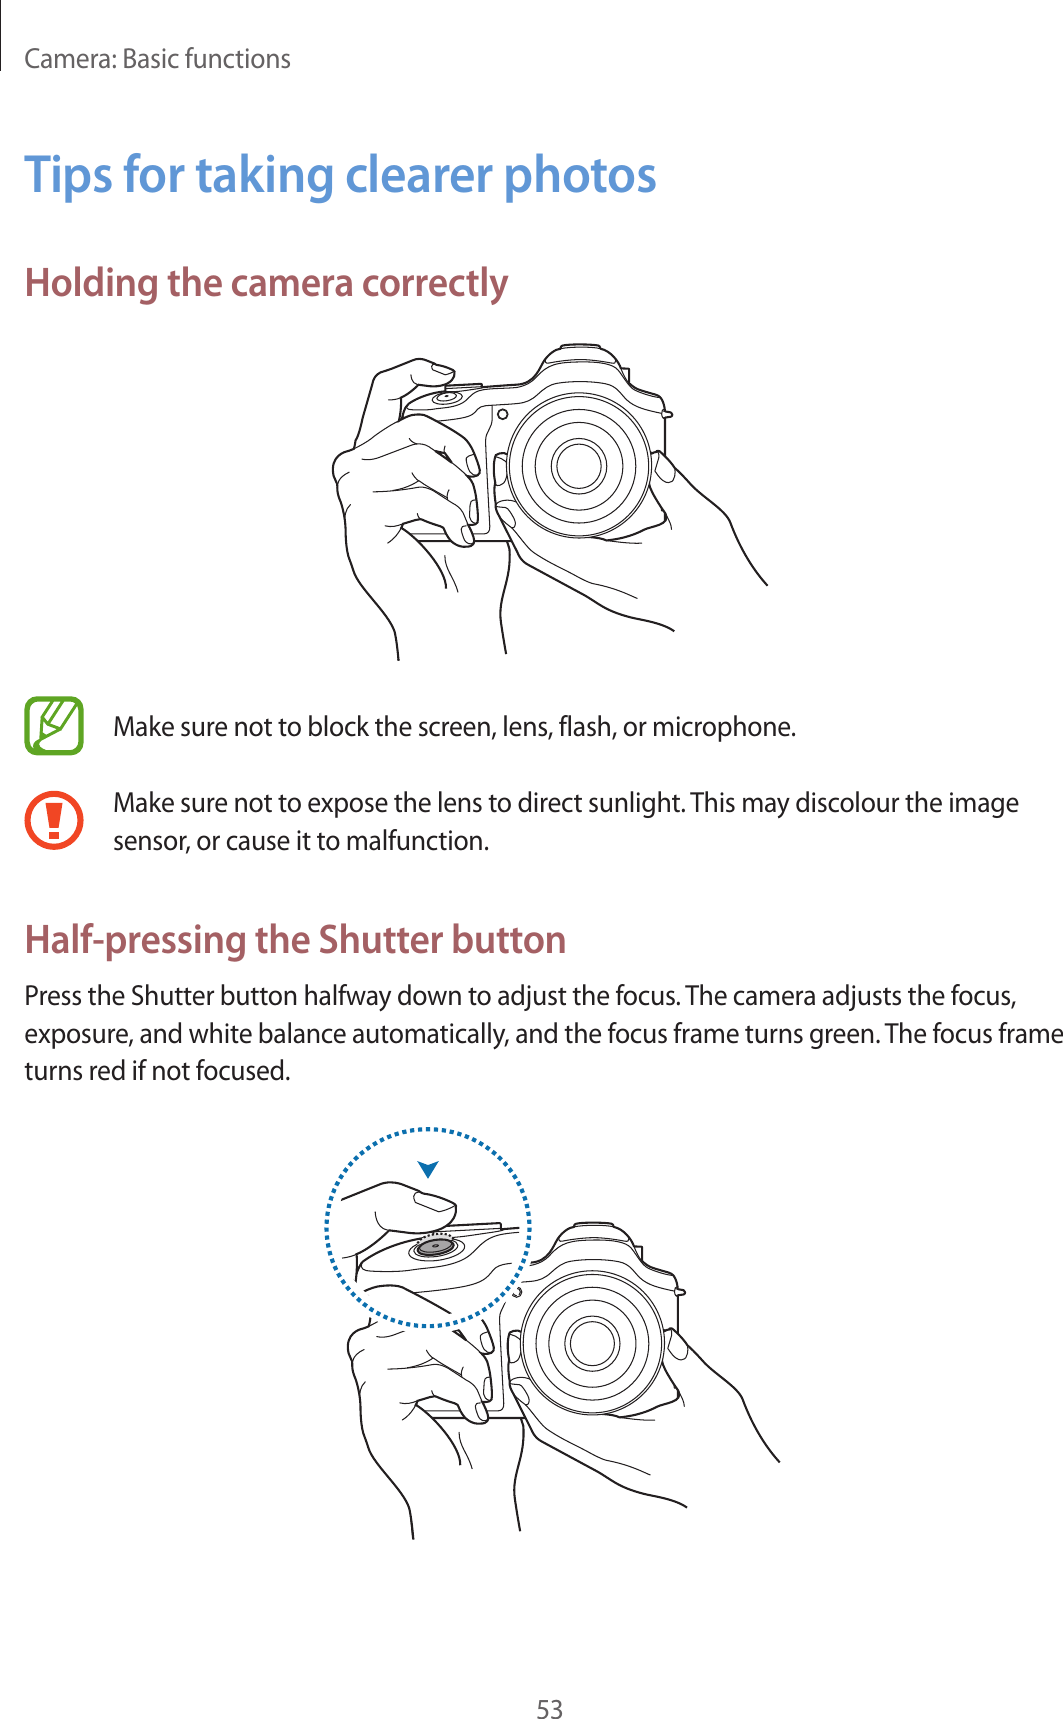 Camera: Basic functions53Tips for taking clearer photosHolding the camera correctlyMake sure not to block the screen, lens, flash, or microphone.Make sure not to expose the lens to direct sunlight. This may discolour the image sensor, or cause it to malfunction.Half-pressing the Shutter buttonPress the Shutter button halfway down to adjust the focus. The camera adjusts the focus, exposure, and white balance automatically, and the focus frame turns green. The focus frame turns red if not focused.